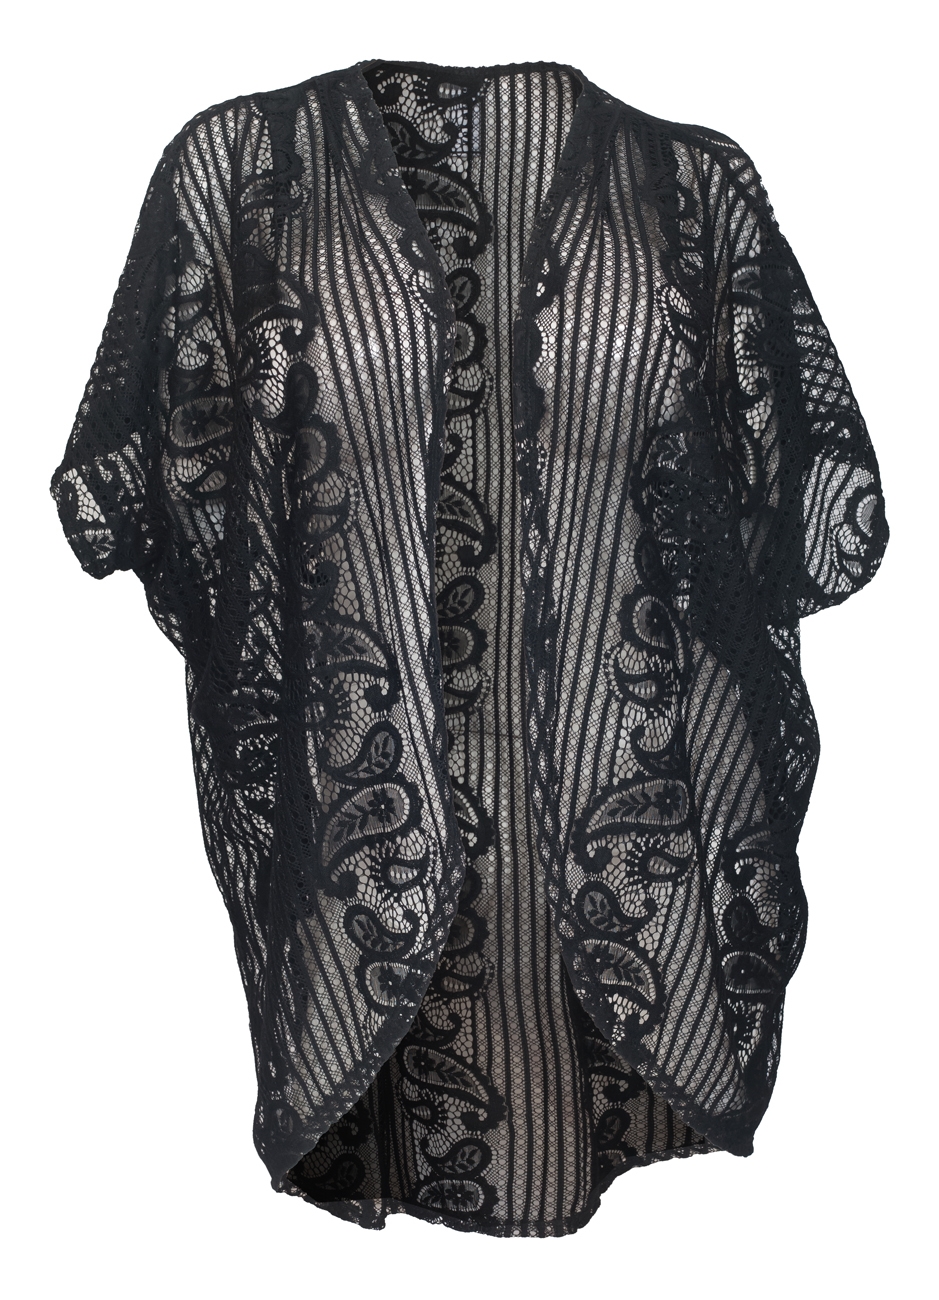 Women's Open Front Sheer Paisley Lace Cardigan Black | eVogues Apparel